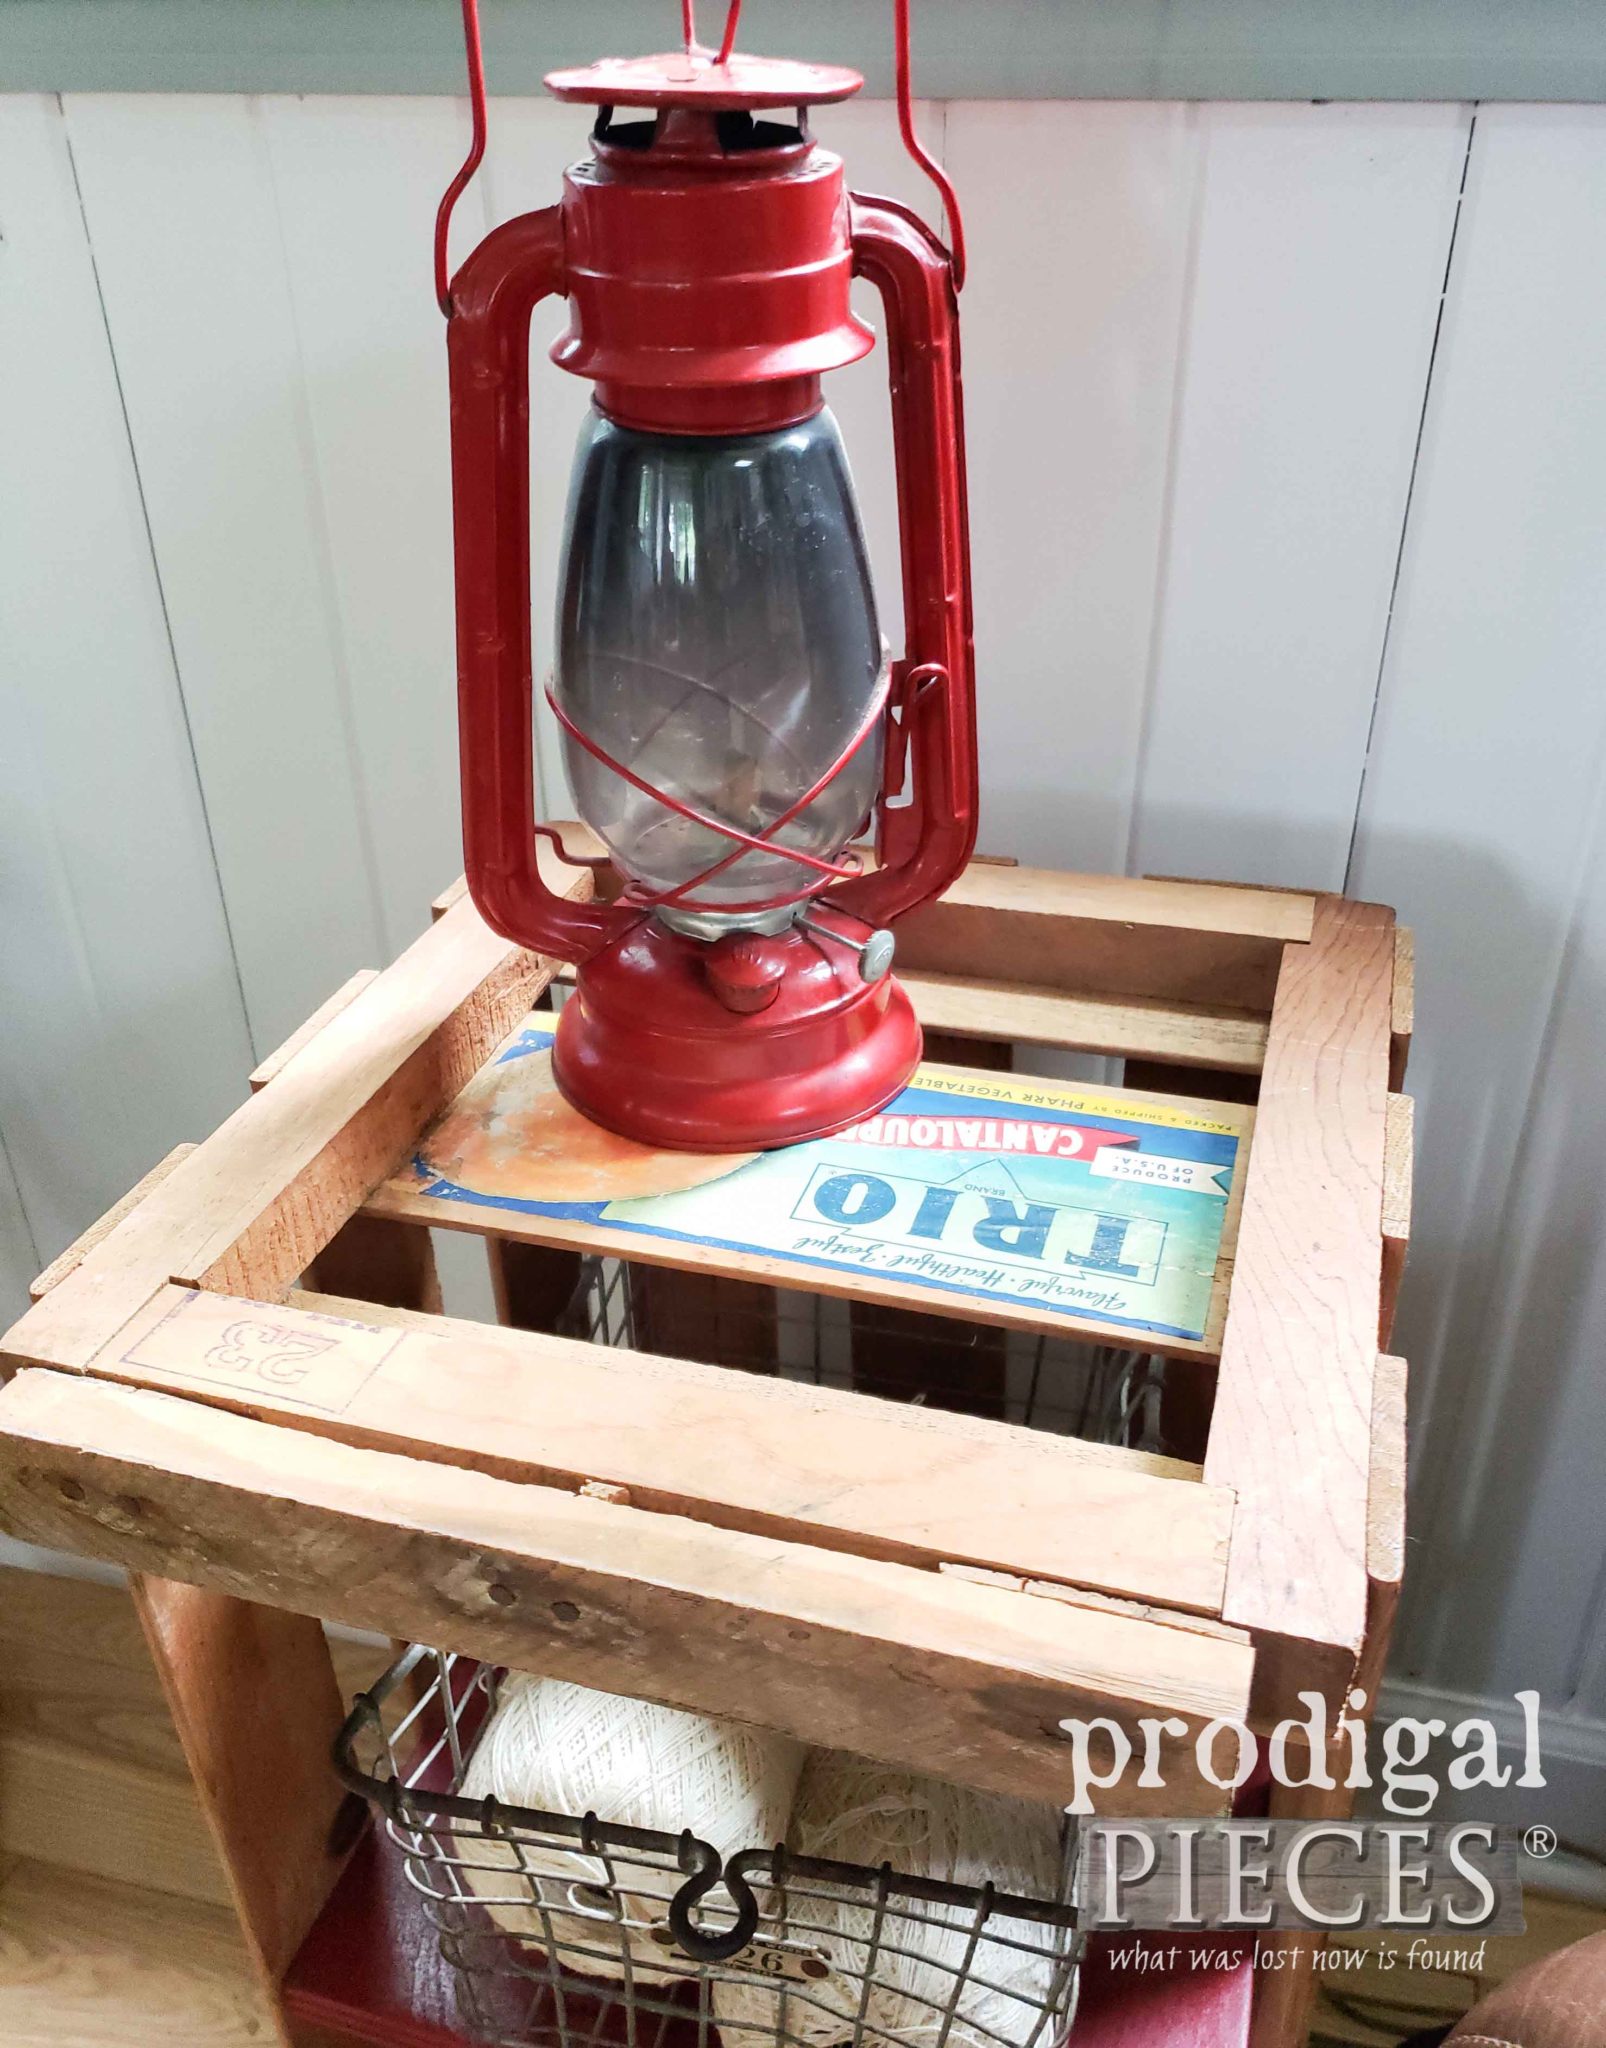 Vintage Trio Cantaloupe Crate Turned into Rustic Farmhouse End Table by Larissa of Prodigal Pieces | prodigalpieces.com #prodigalpieces #diy #homedecor #farmhouse #home